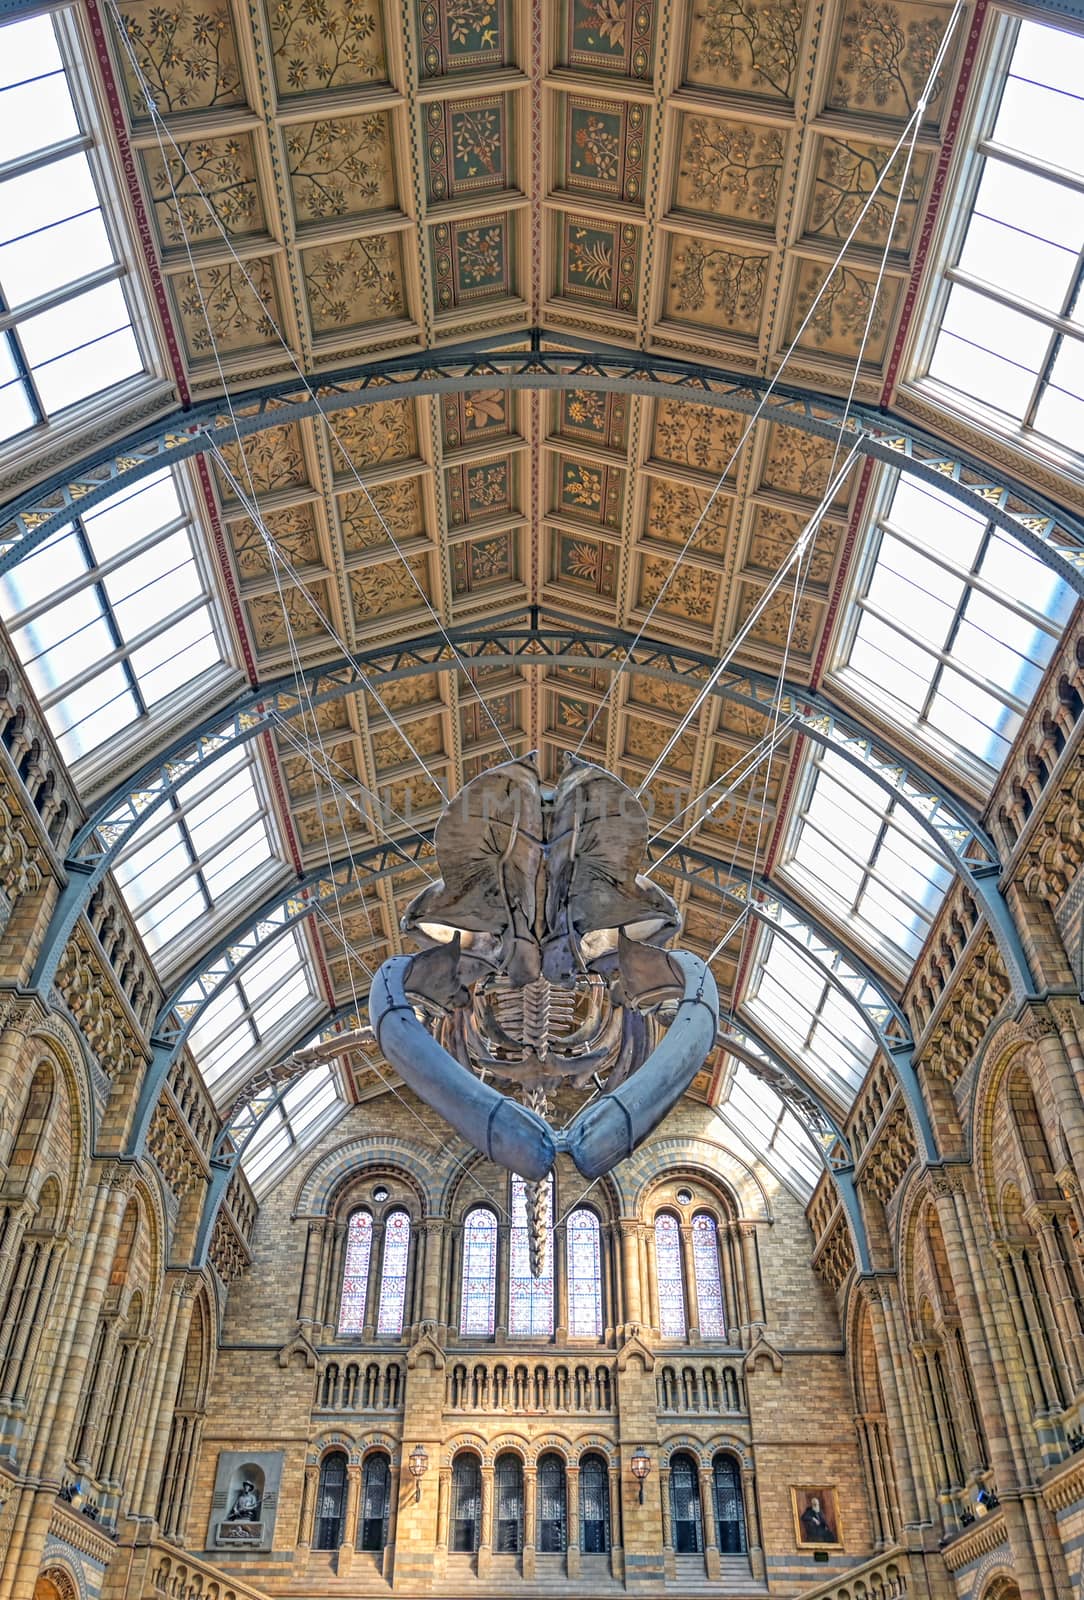 London, United Kingdom - April 17, 2019 - The interior of Natural History Museum and and whale skeleton in London, United Kingdom.